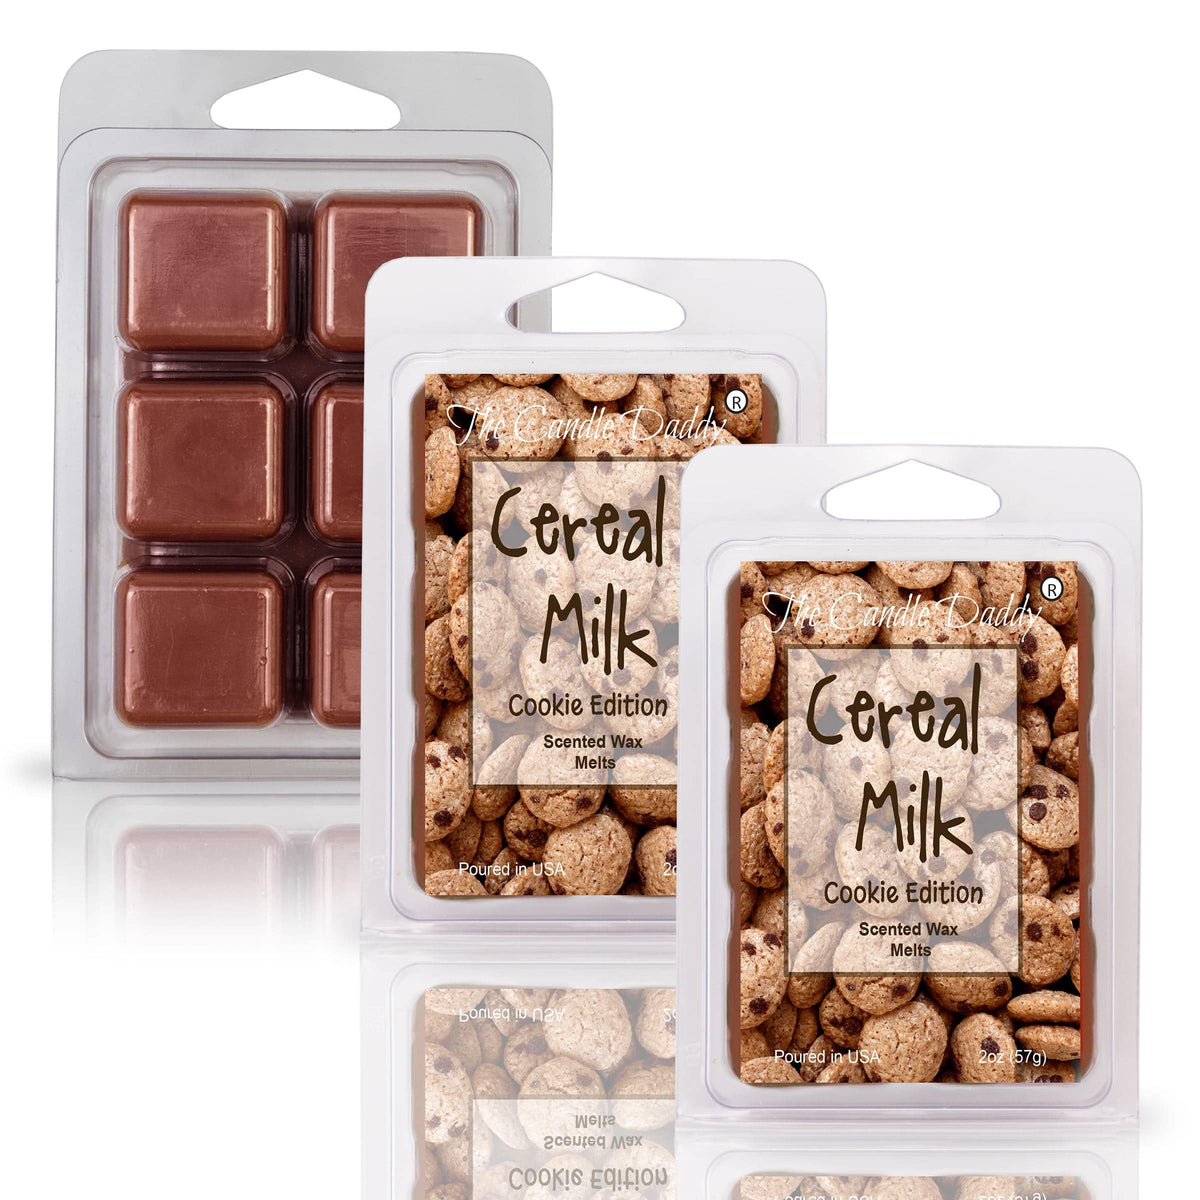 Cereal Milk - Cinnamon Toast Version Scented Wax Melt - 1 Pack - 2 Ounces -  6 Cubes